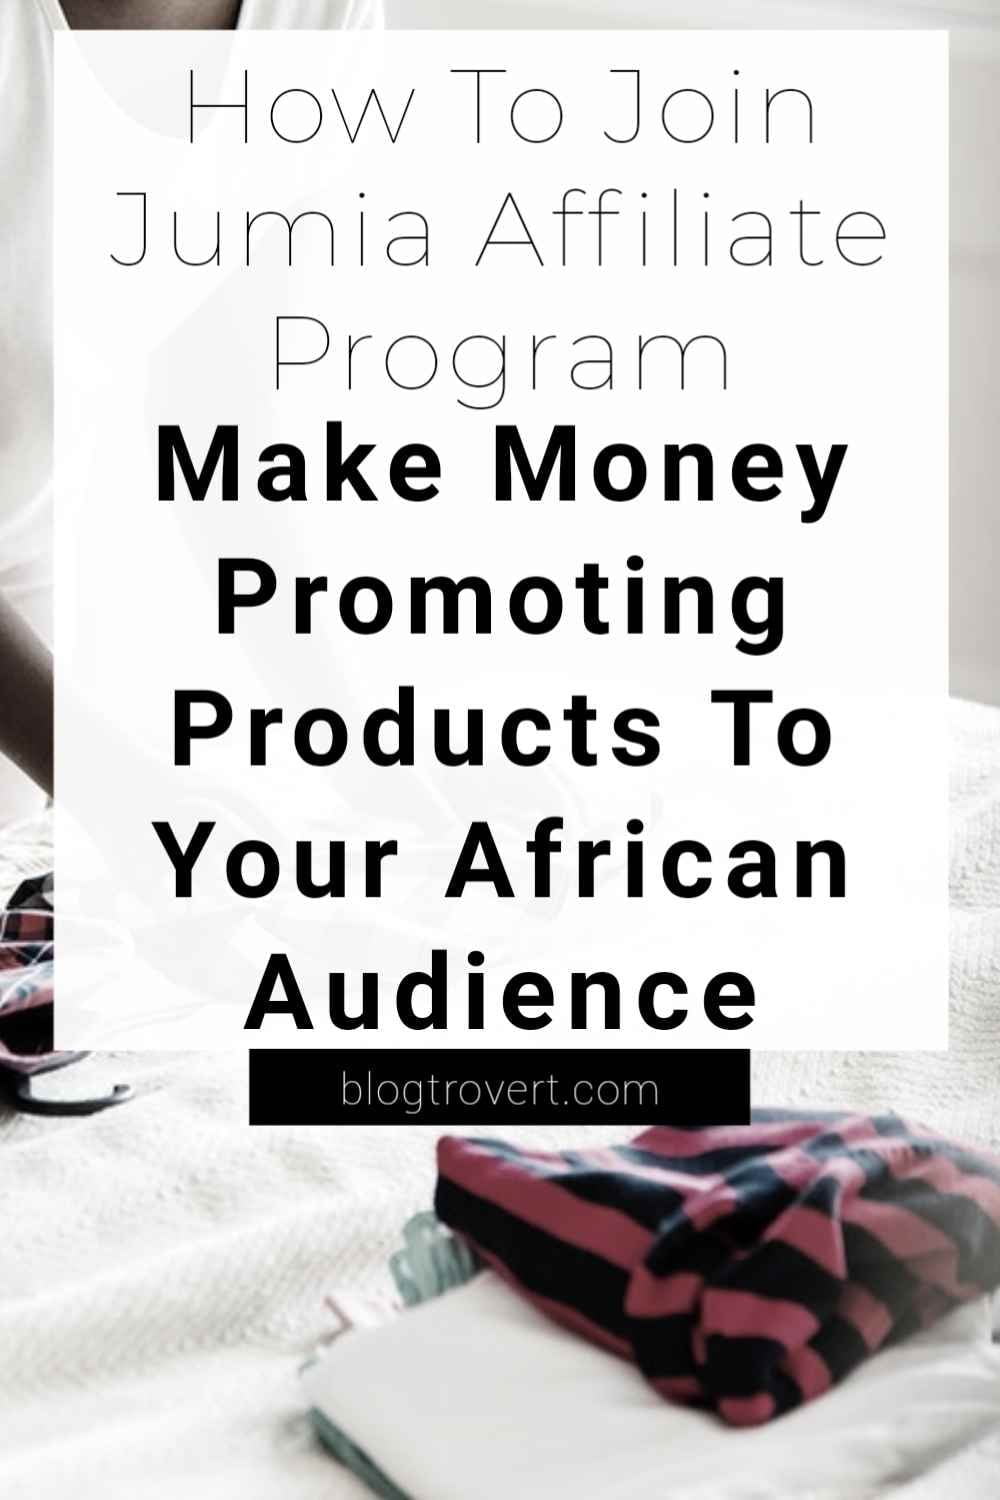 How To Join The Jumia Affiliate Program And Get Paid To Promote Products 1